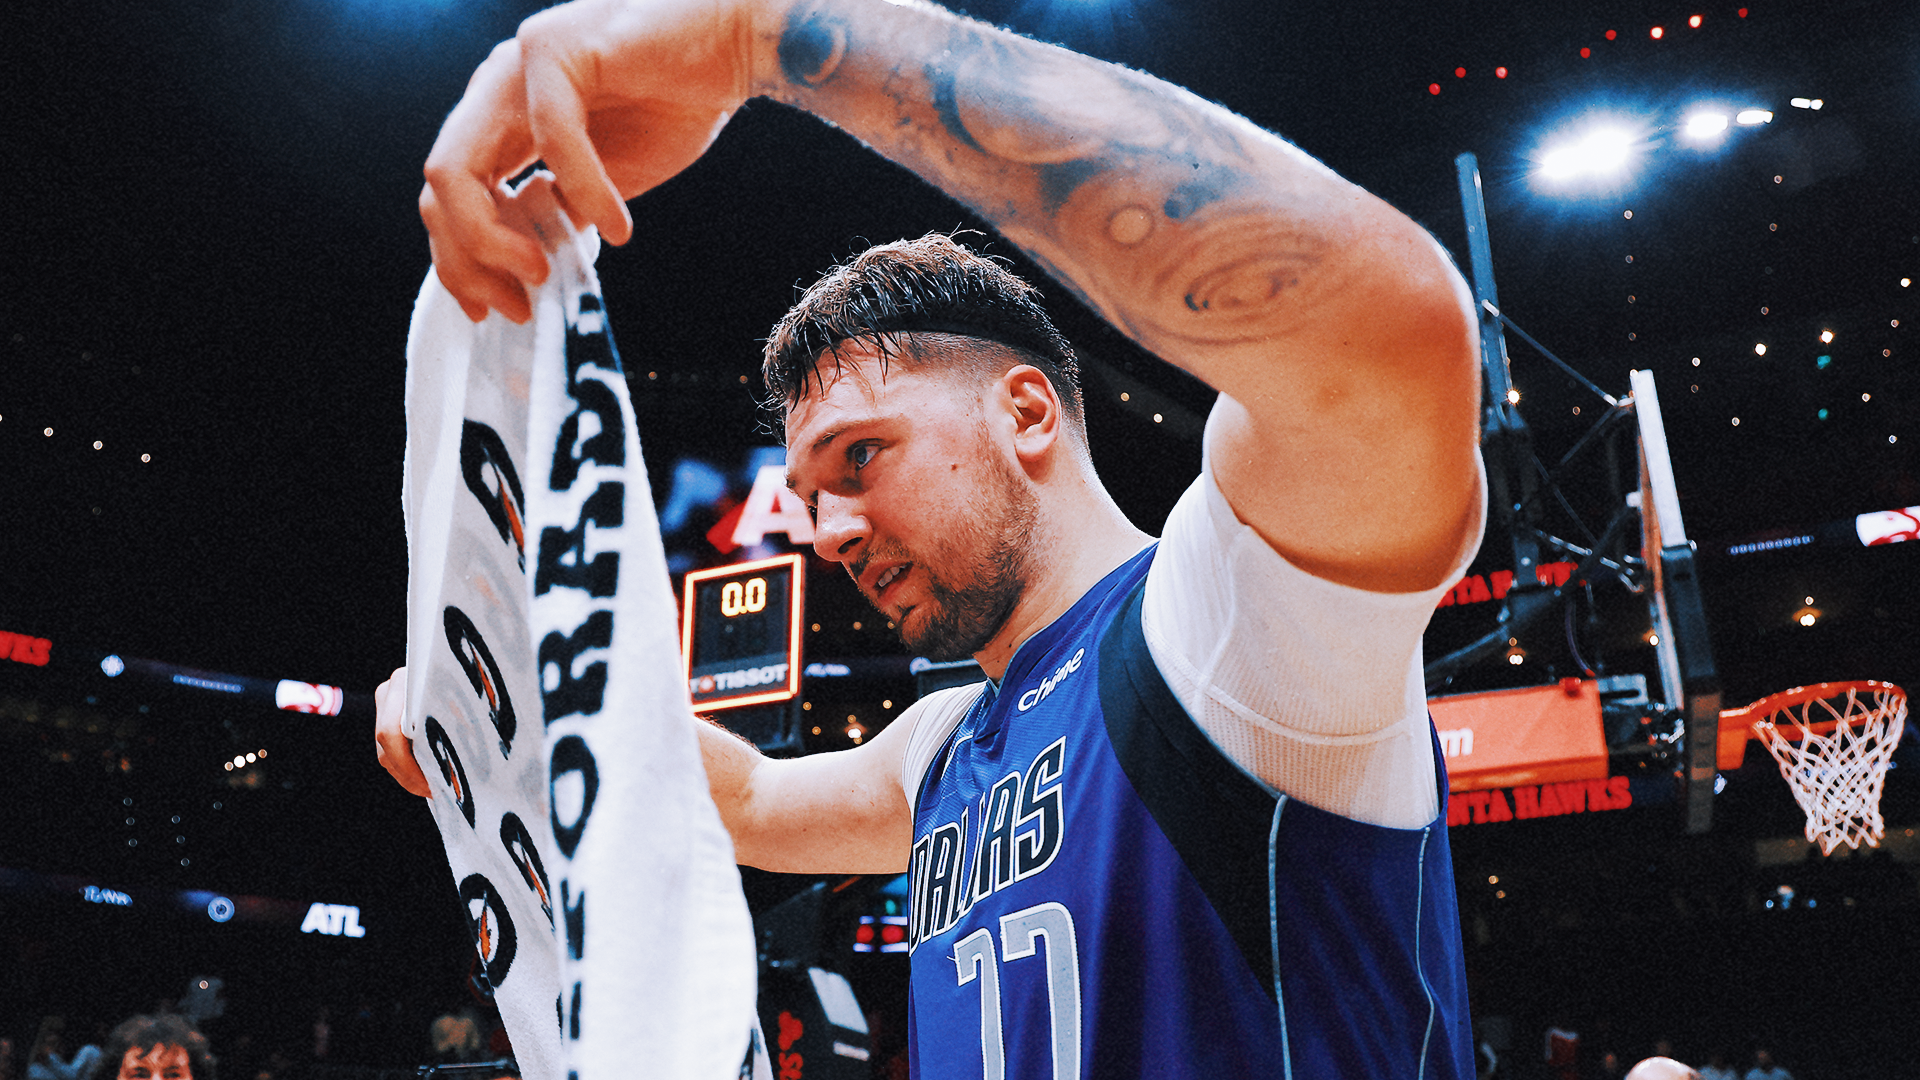 Luka Doncic scores 73, Devin Booker scores 62 and NBA Twitter is on fire again